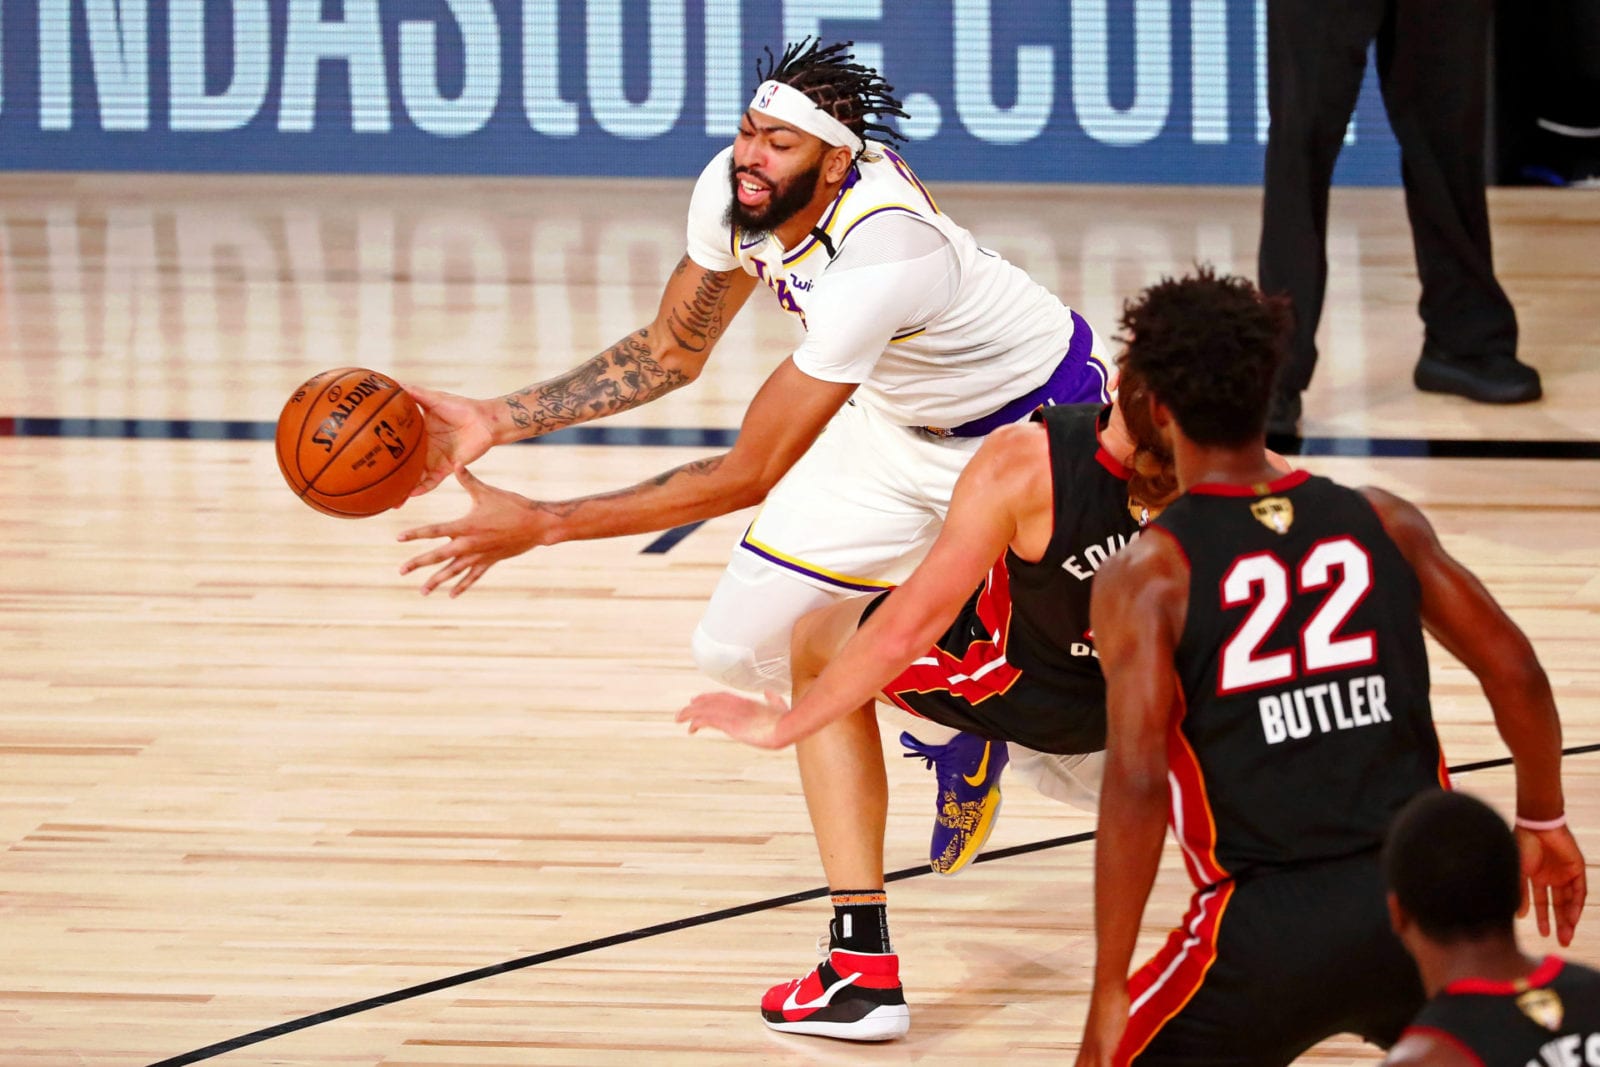 Lakers Say They’re Focused Despite Lackluster Effort in Game 3